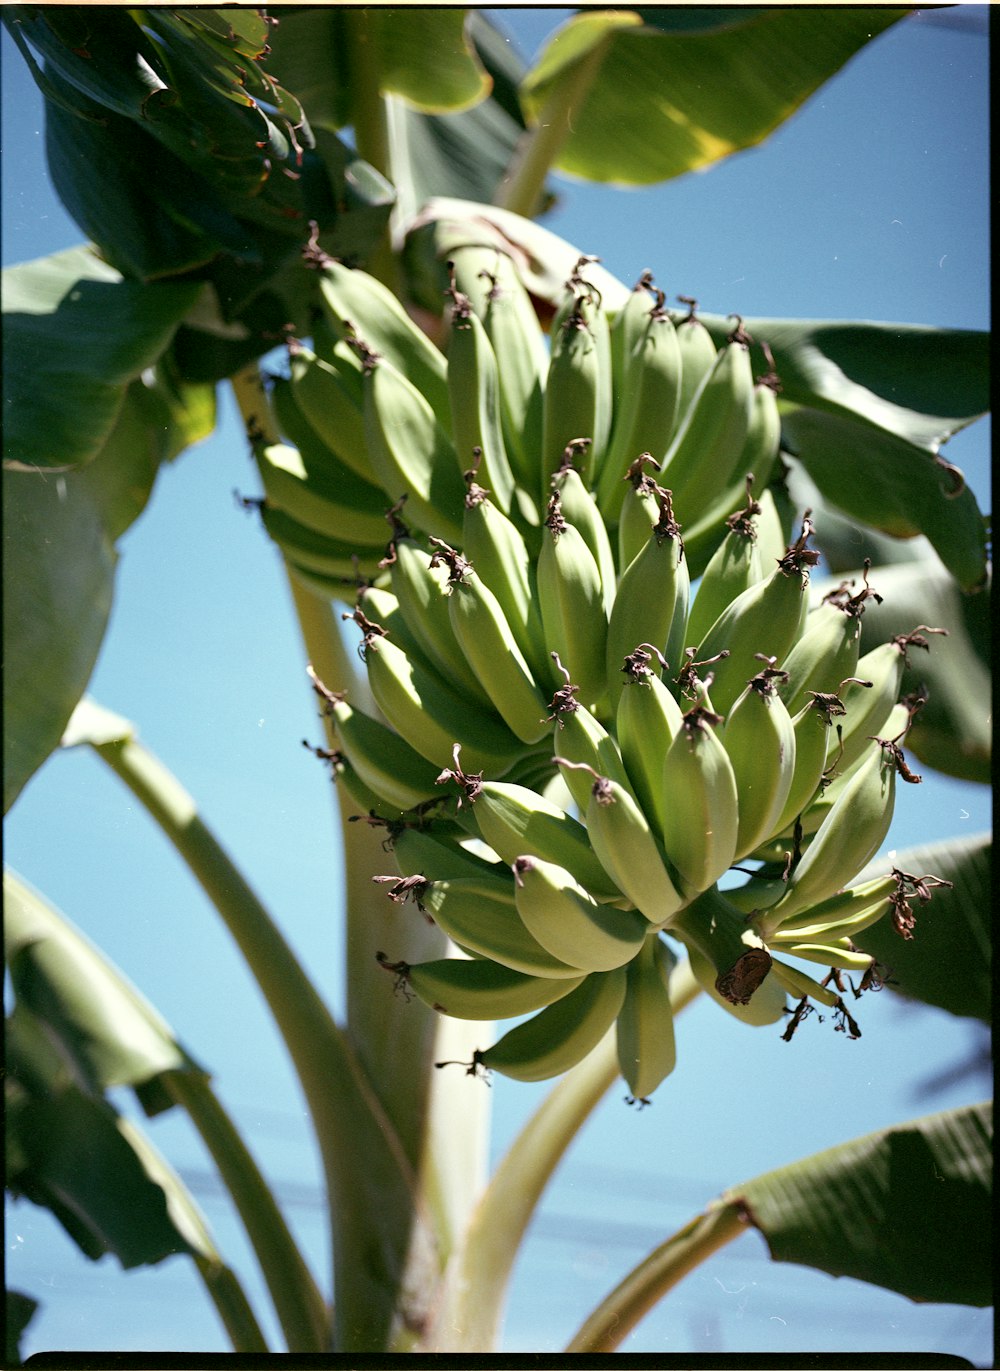 a bunch of bananas growing on a tree